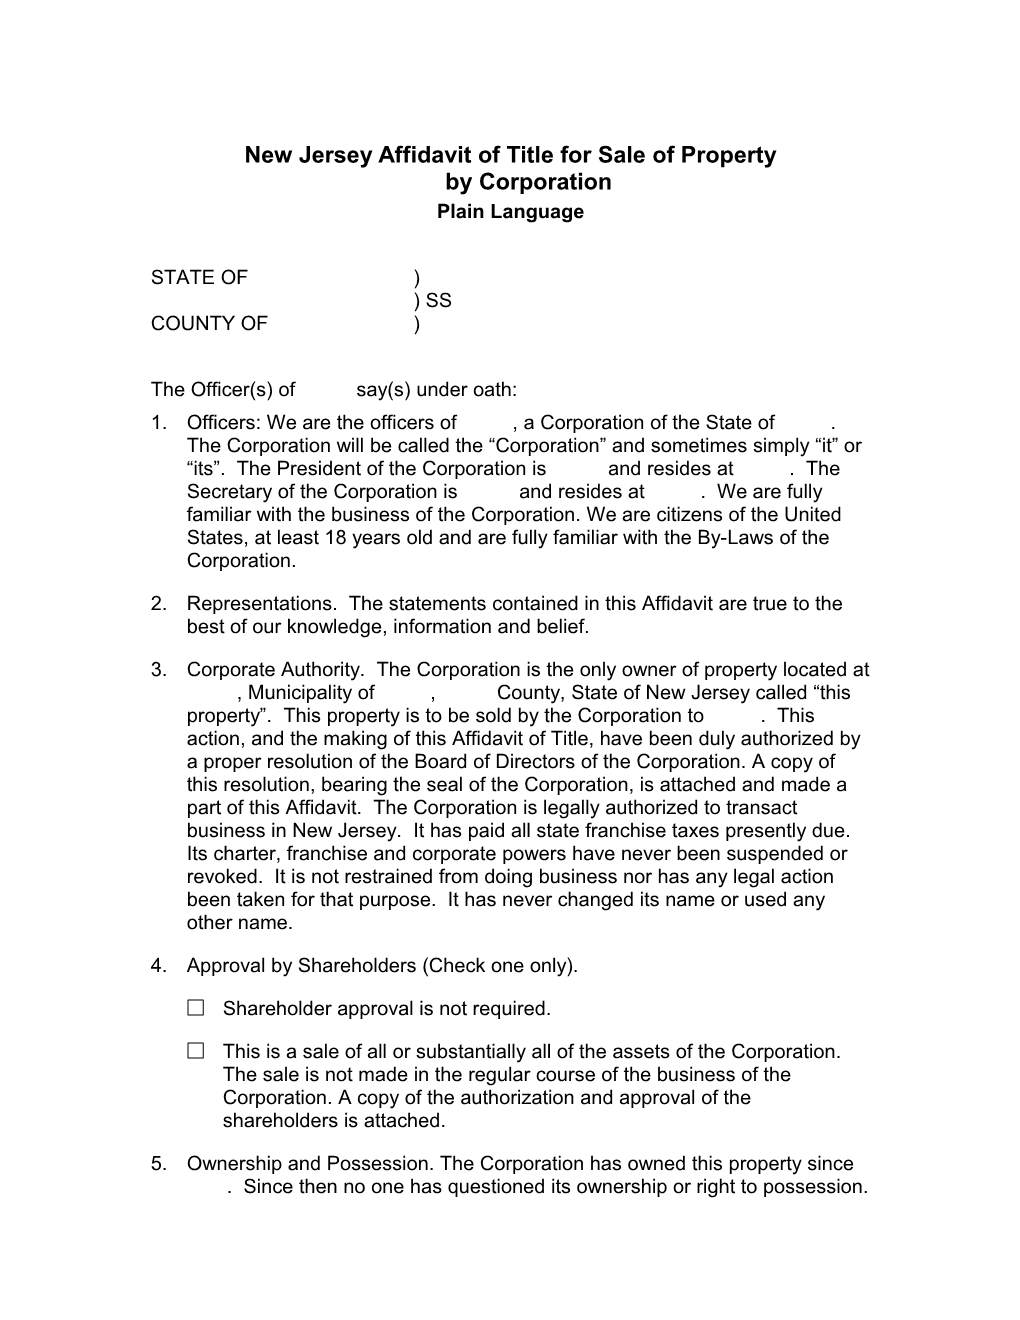 New Jersey Affidavit of Title for Sale Or Mortgage of Property